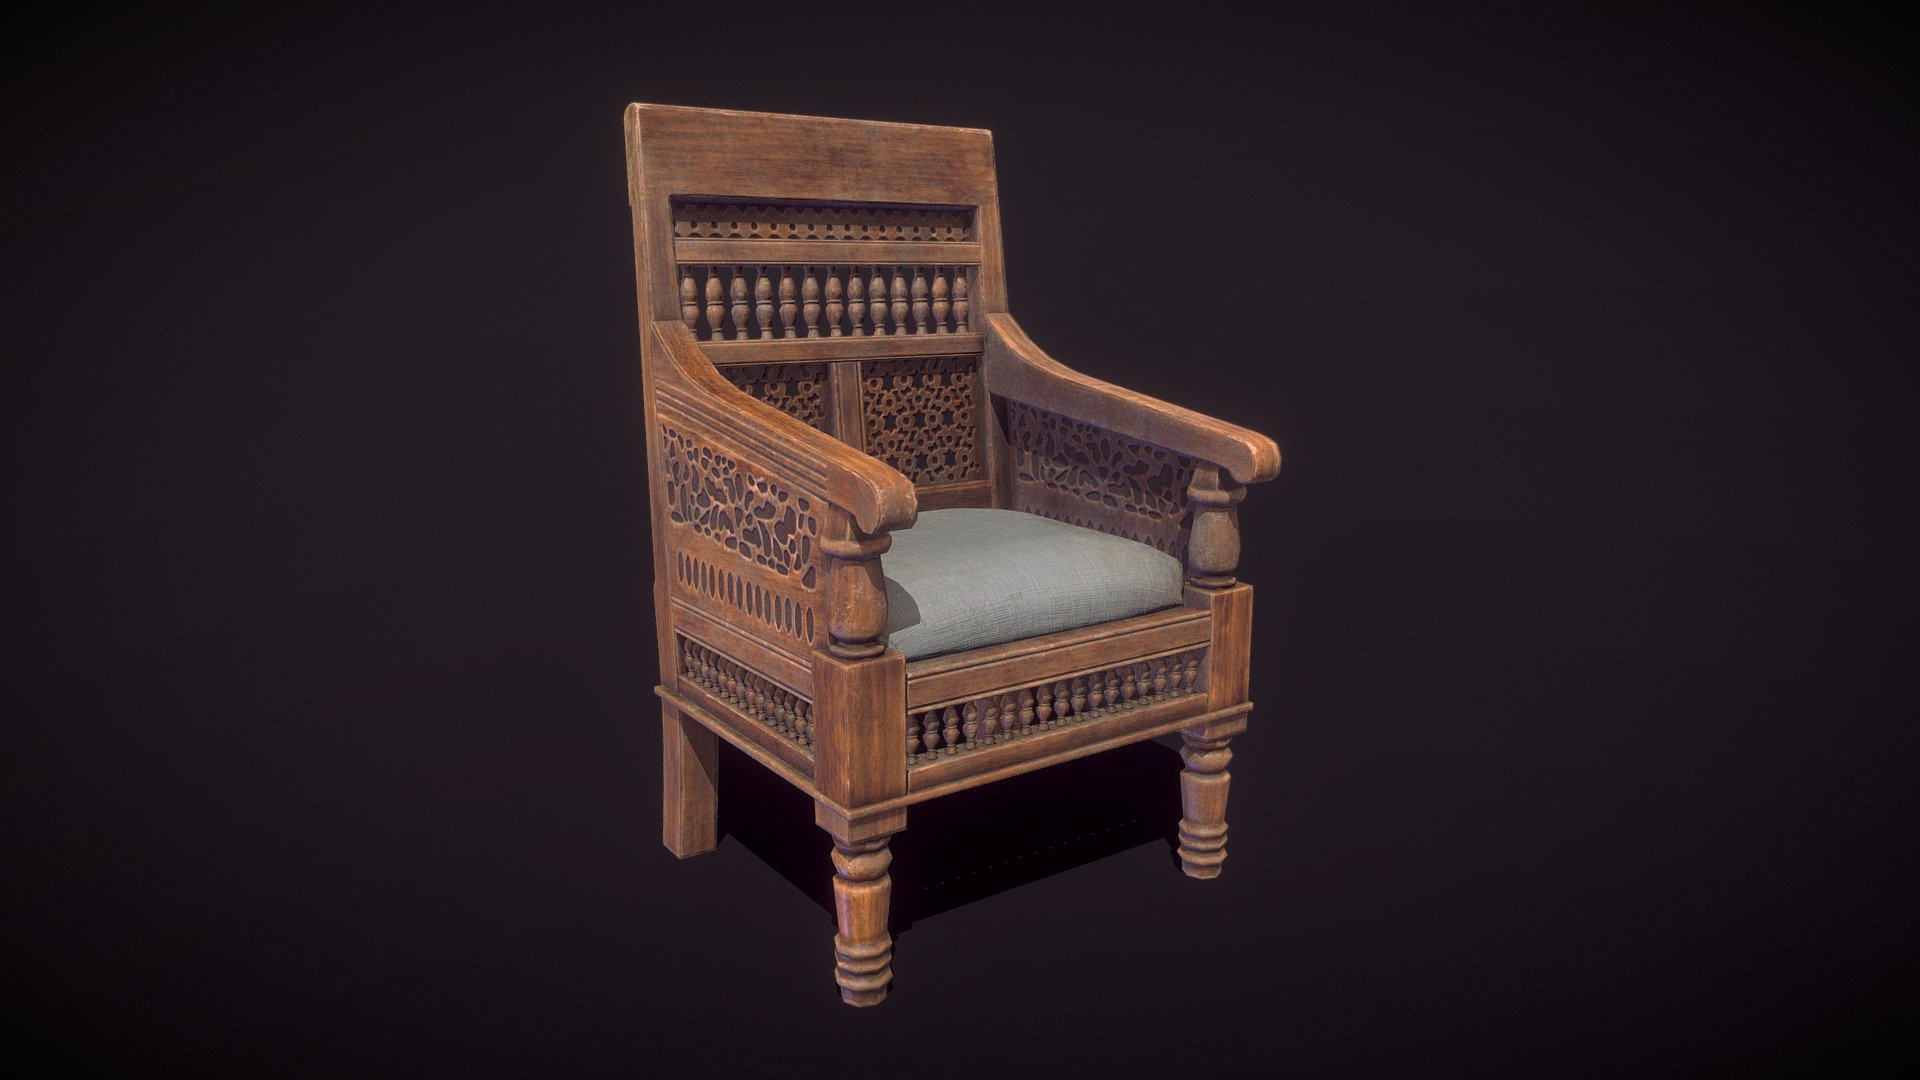 Wooden Chair asset for games, I used Maya for modeling high poly, low ploy, uvs and used ZBrush for sculpting, Marmoset Toolbag 4 for baking and render, Substance Painter for Textures.
Poly count is 8402 tris and textures are in 4kx4k.
Project Link: https://www.artstation.com/artwork/NGKXQ1
The model is based on this reference I found online and some similar chairs online. Reference link:
https://www.amazon.in/Shilpi-Sheesham-Antique-Seating-Handmade/dp/B077N4SYY1
I started this model in an online session for an online global game jam event to show 3D basics for games, but I continued it later. I hope you like :) - Wooden Chair - Buy Royalty Free 3D model by tareklatif 3d model